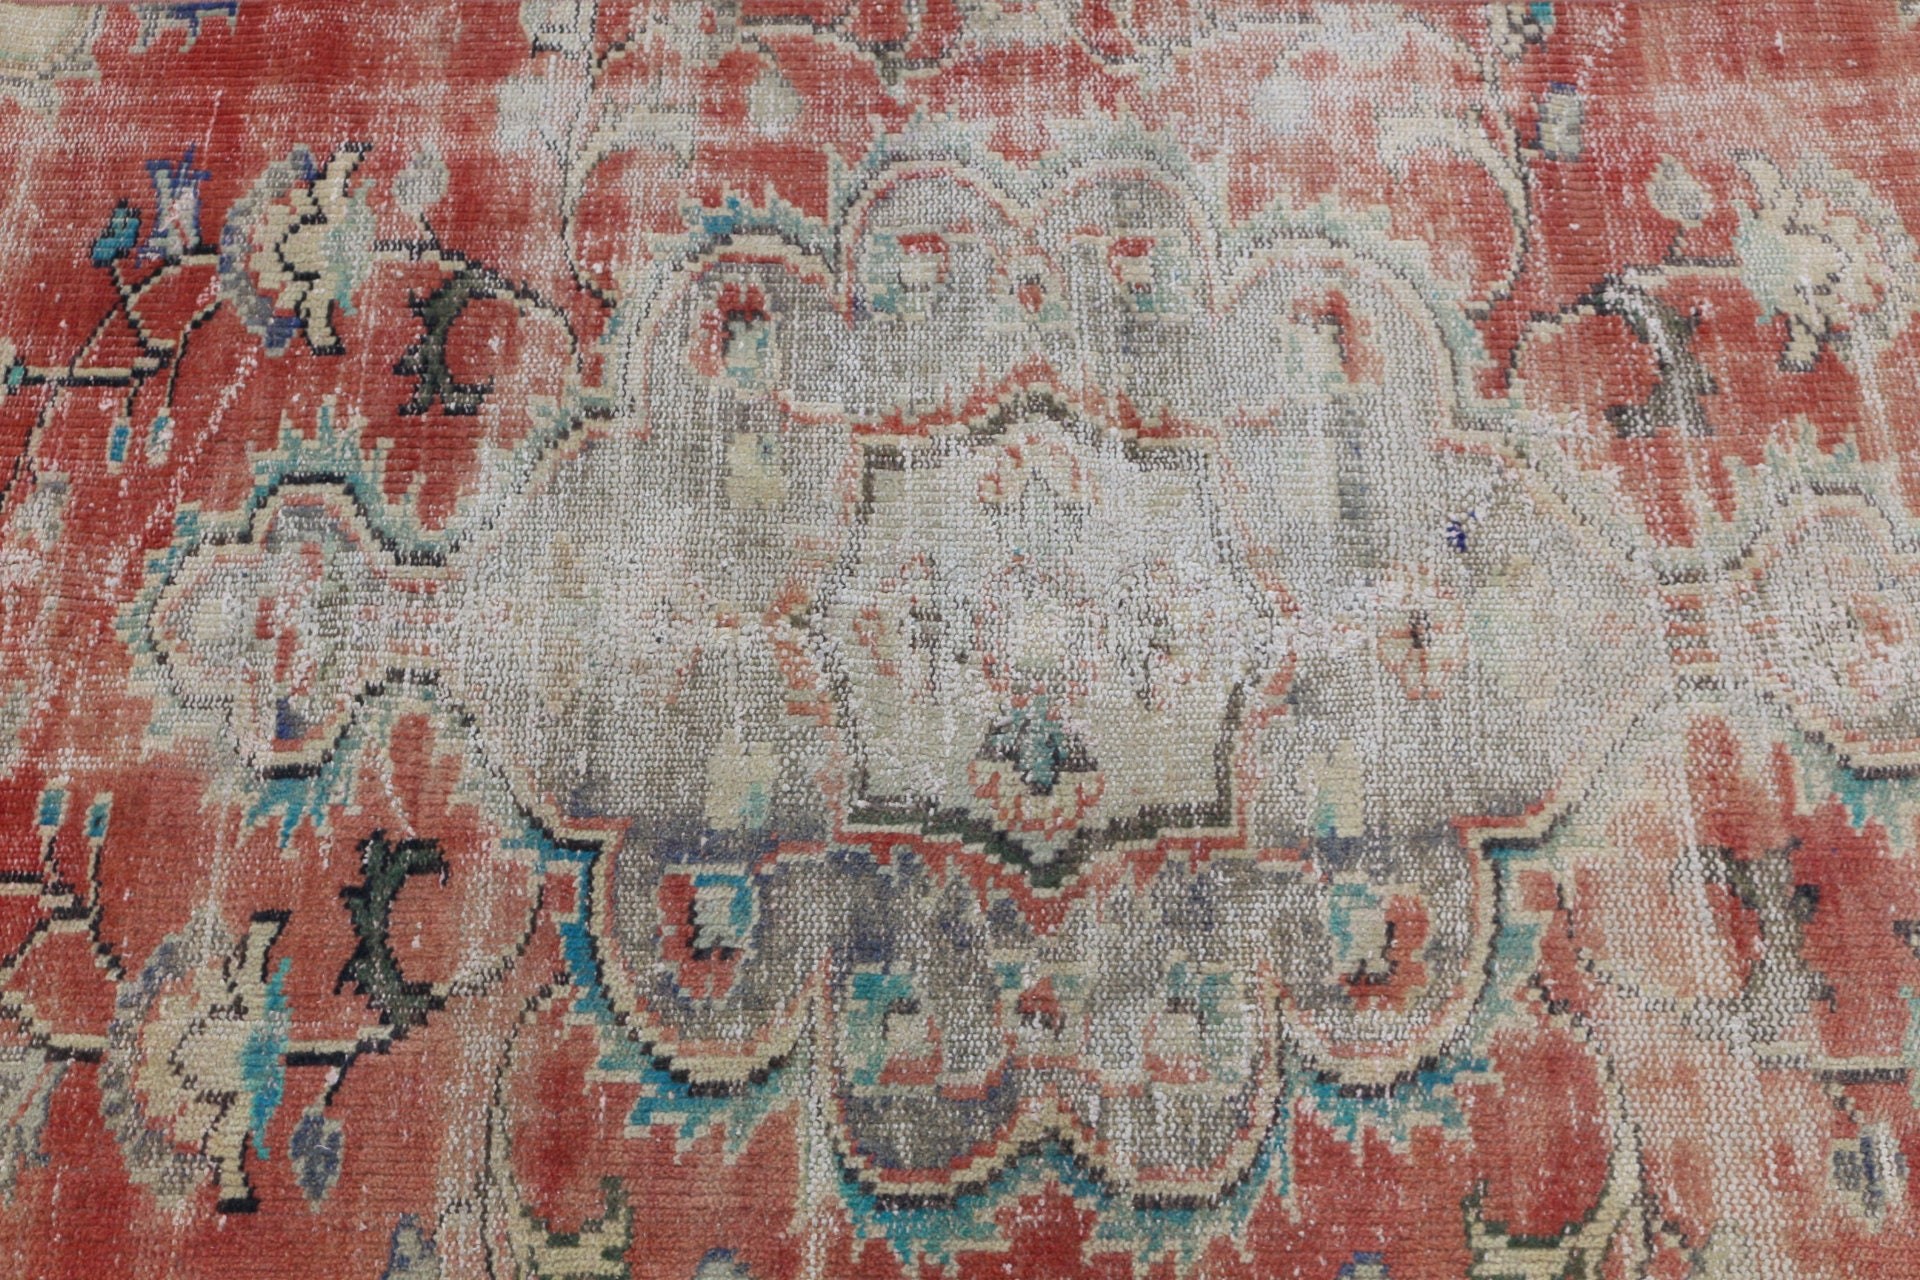 Red Oriental Rugs, Moroccan Rugs, Vintage Rugs, 3.1x7.4 ft Accent Rugs, Nursery Rug, Rugs for Kitchen, Kitchen Rug, Wool Rugs, Turkish Rug